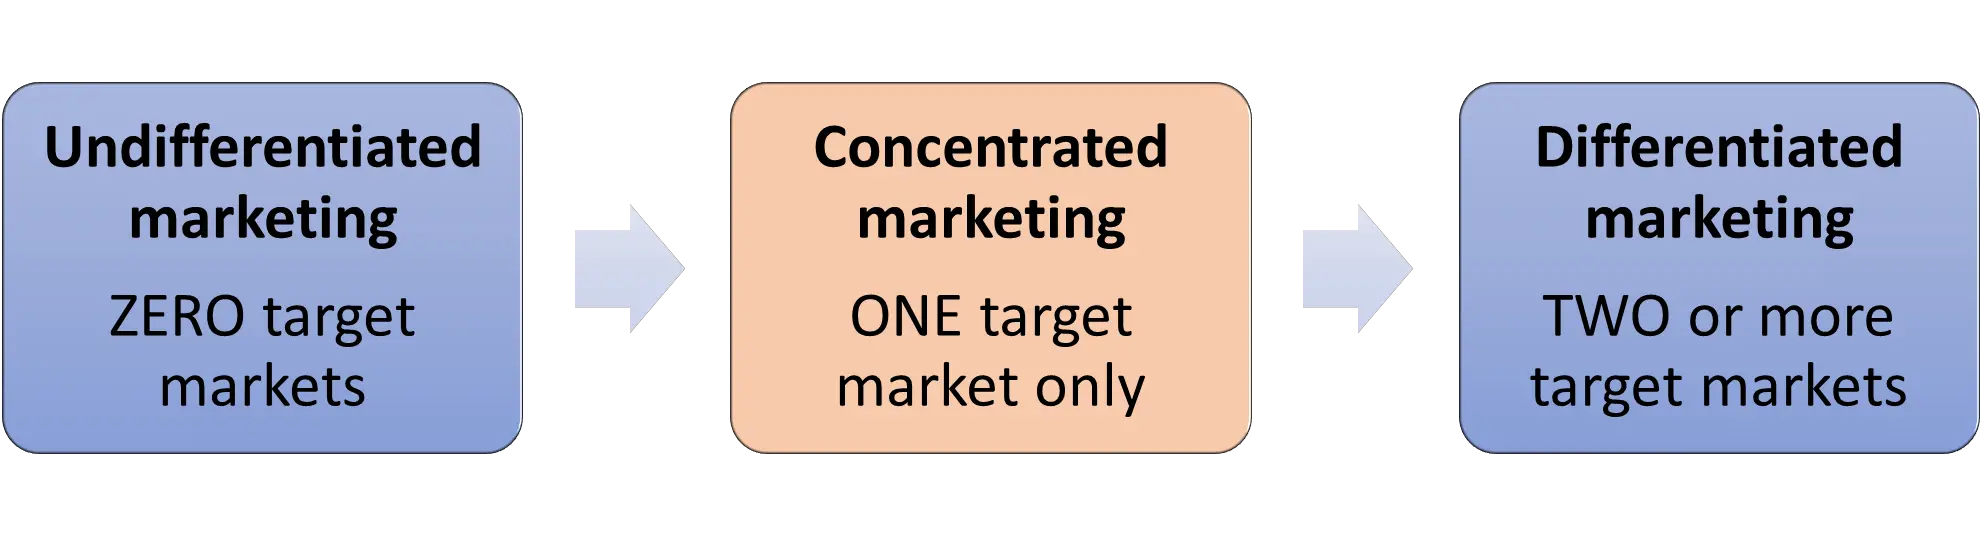 differentiated marketing and undifferentiated marketing